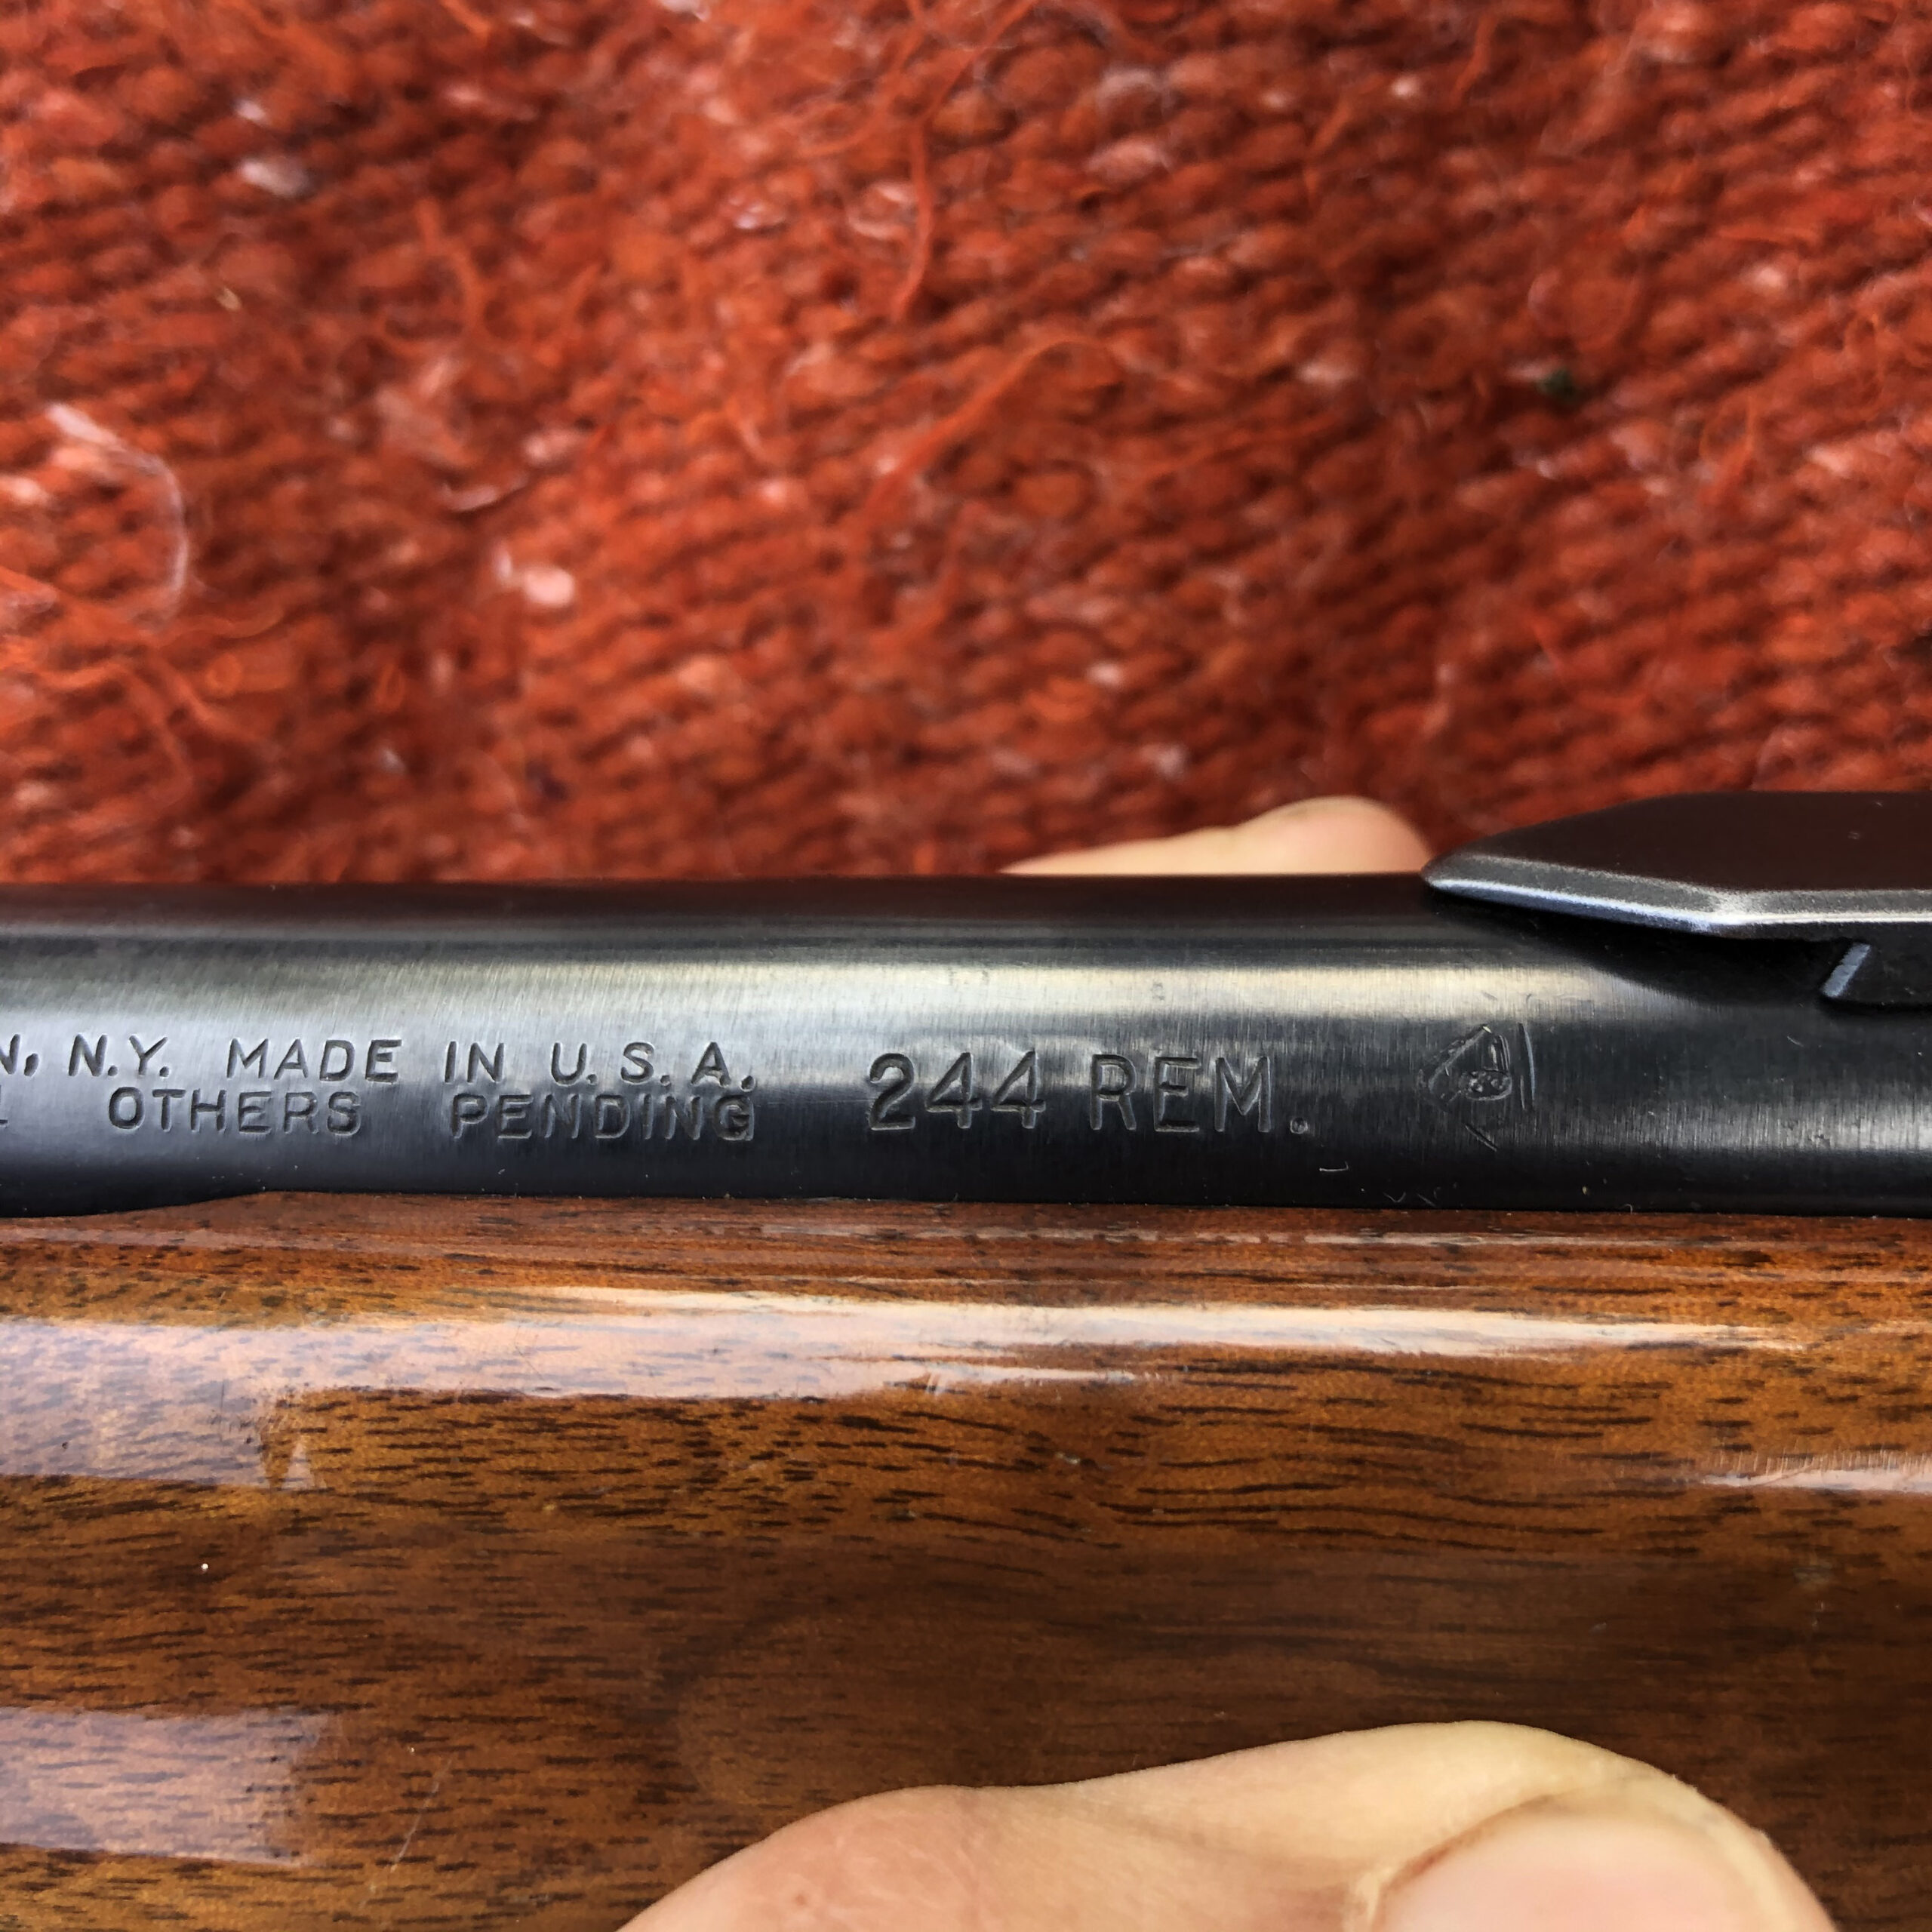 A glossy, wood-stocked Remington with a metal barrel stamped with 244 REM and "Made in the U.S.A."